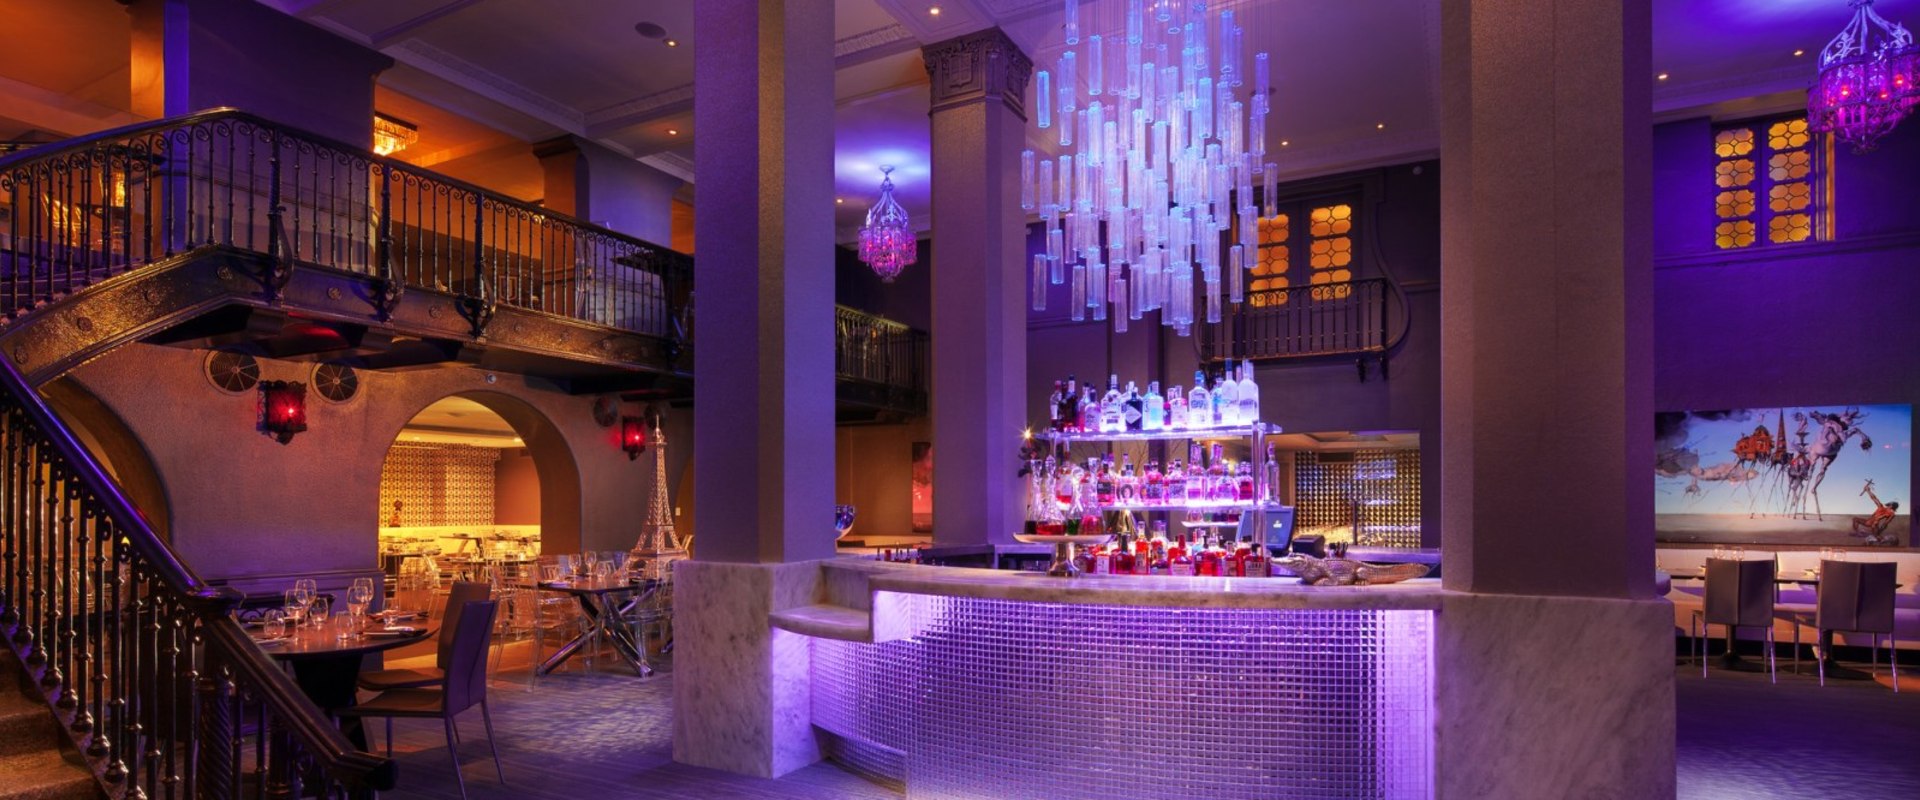 The Best Lounges in San Antonio for a Classy and Upscale Experience